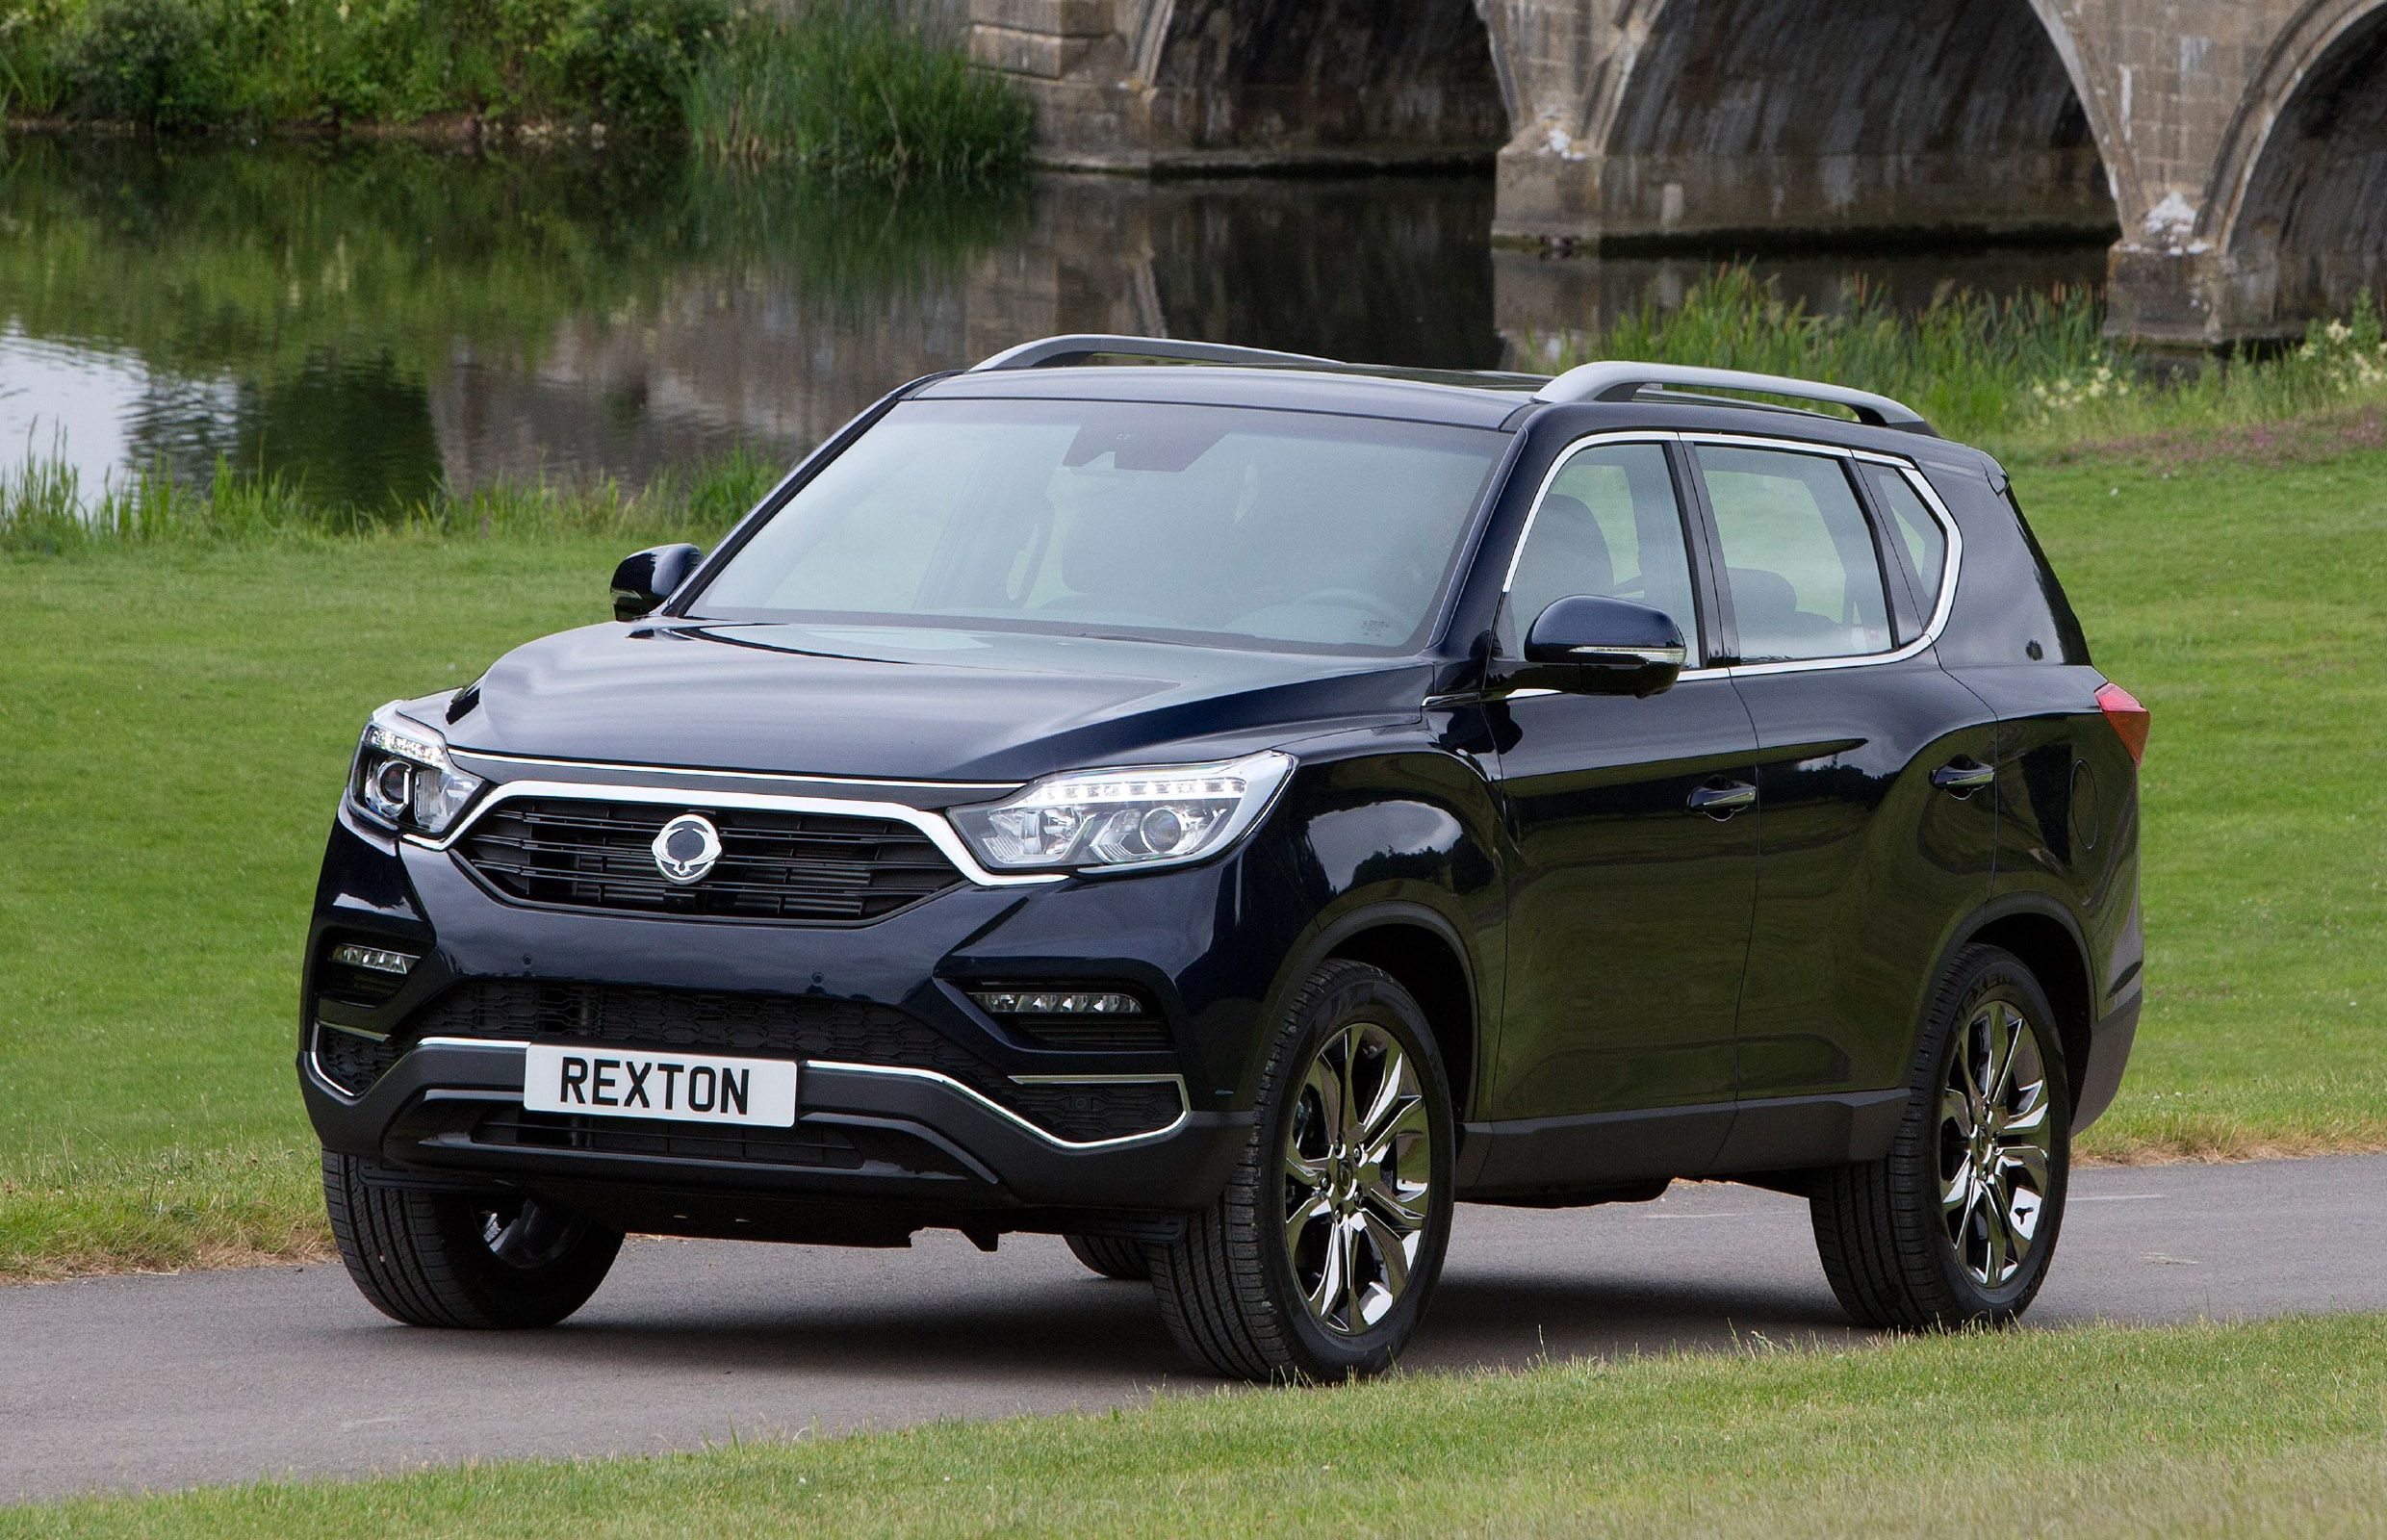 The New SsangYong Rexton is Here!